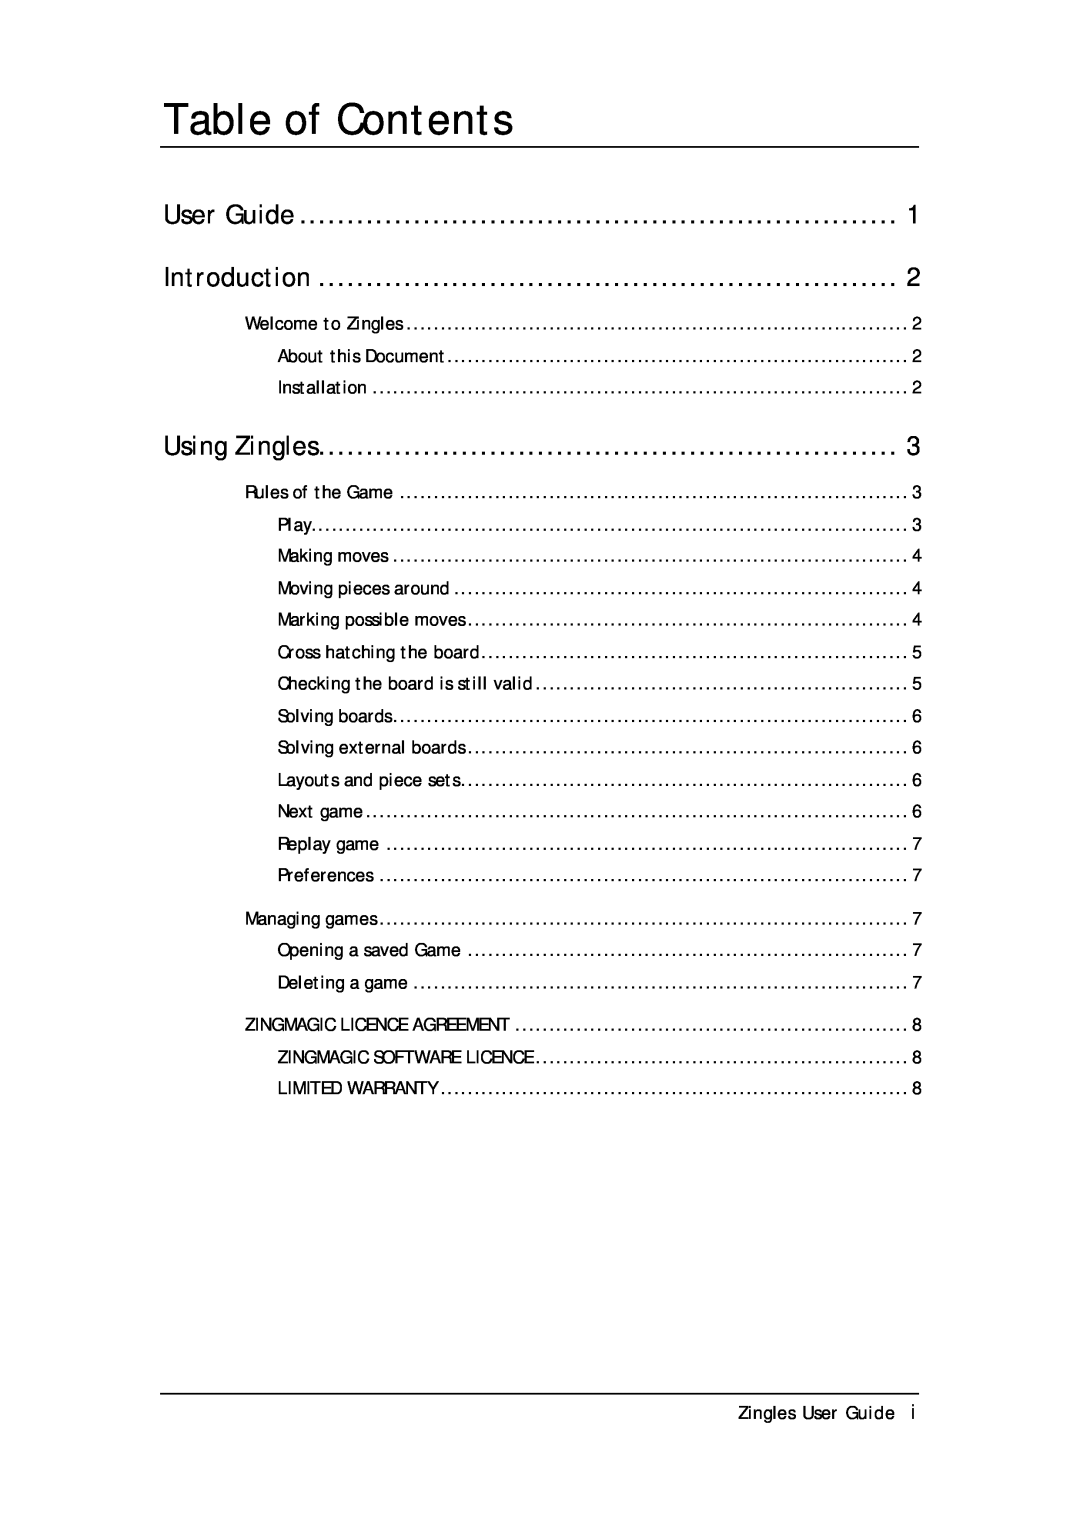 Zing Magic Series 80 manual Zingles User Guide, Table of Contents, Introduction, Using Zingles 